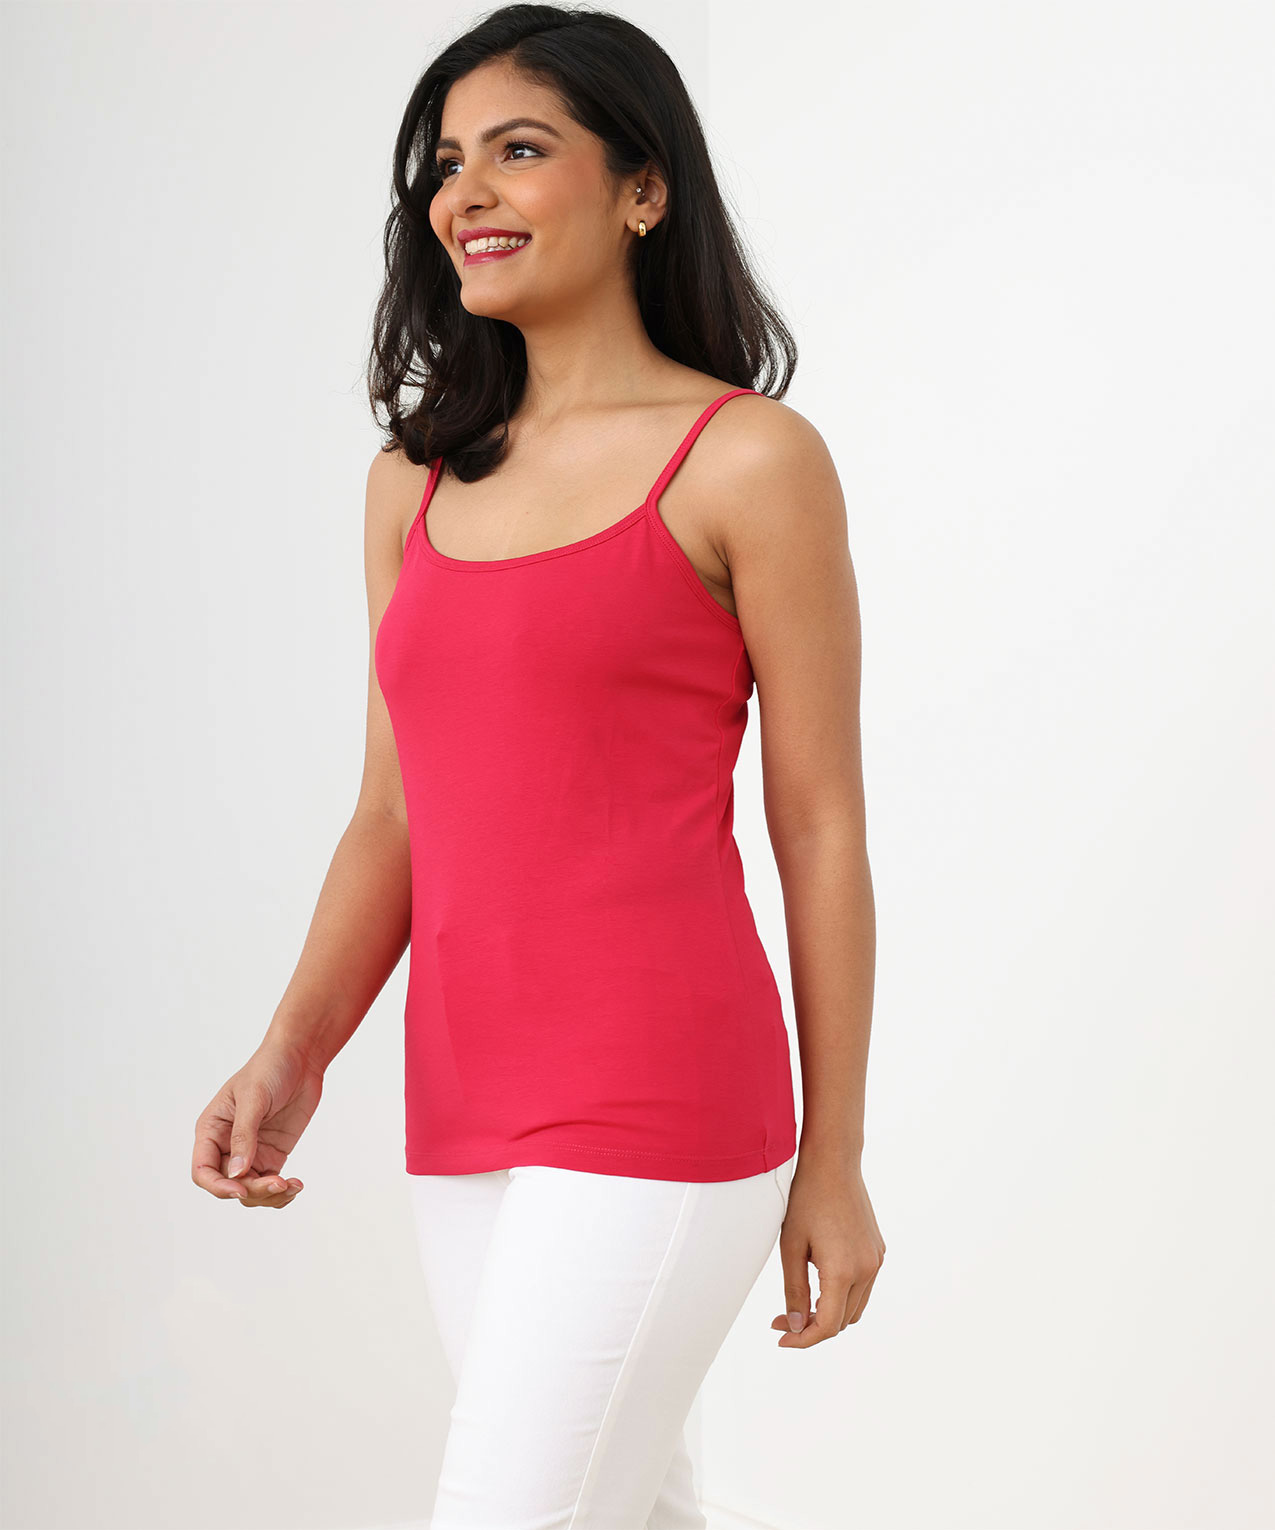 Buy Tank Tops with Built in Bra, Camisoles for Women with Shelf